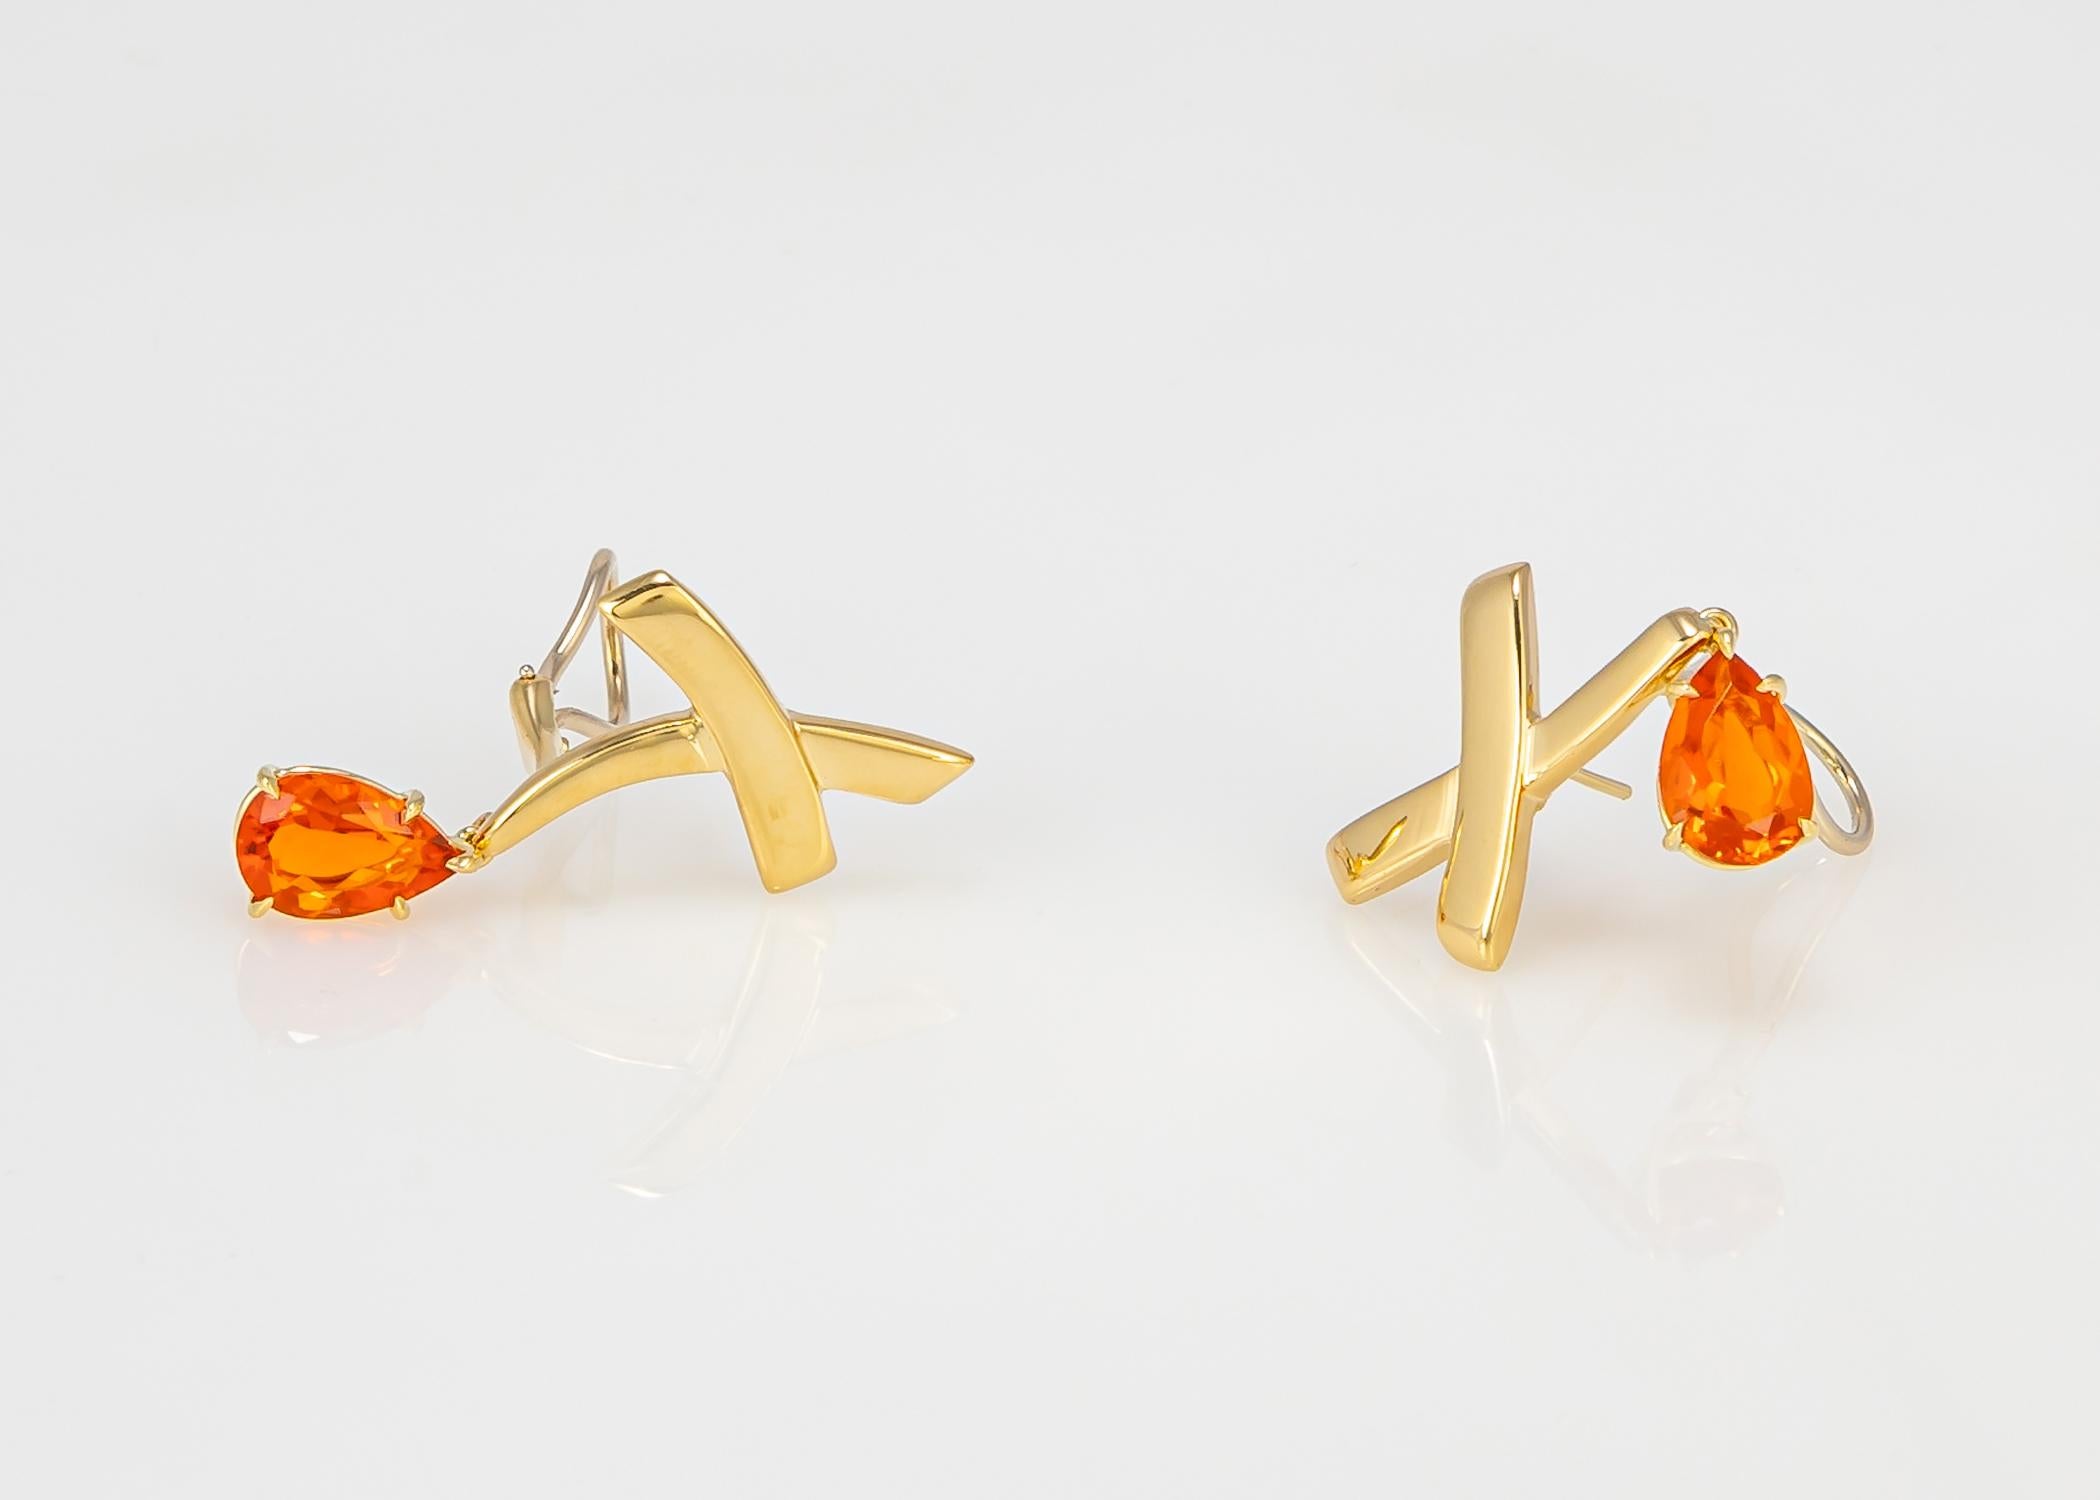 Paloma Picasso adds her unique imagination to the established quality of Tiffany jewelry. This Picasso classic features vivid fire opals that add a bright ray of sunshine.  The gold X portion is one inch in length and with the drops approximately 1